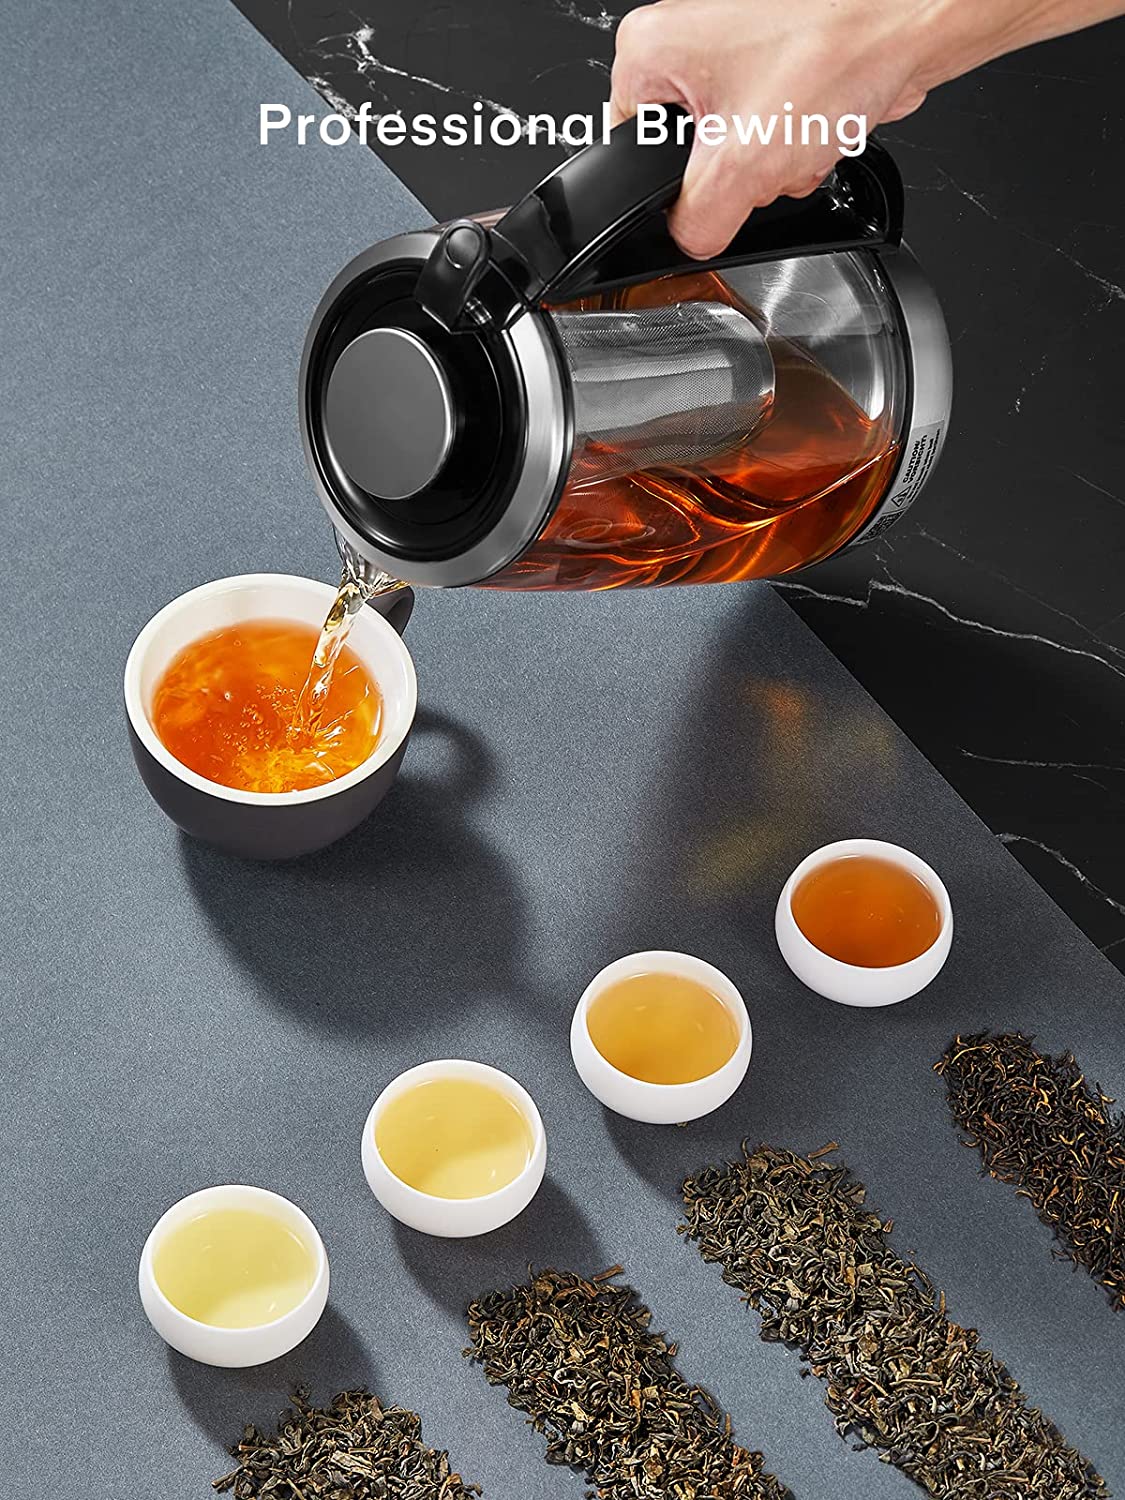 Electric Kettle with Temperature Control and Tea Infuser, FOHERE